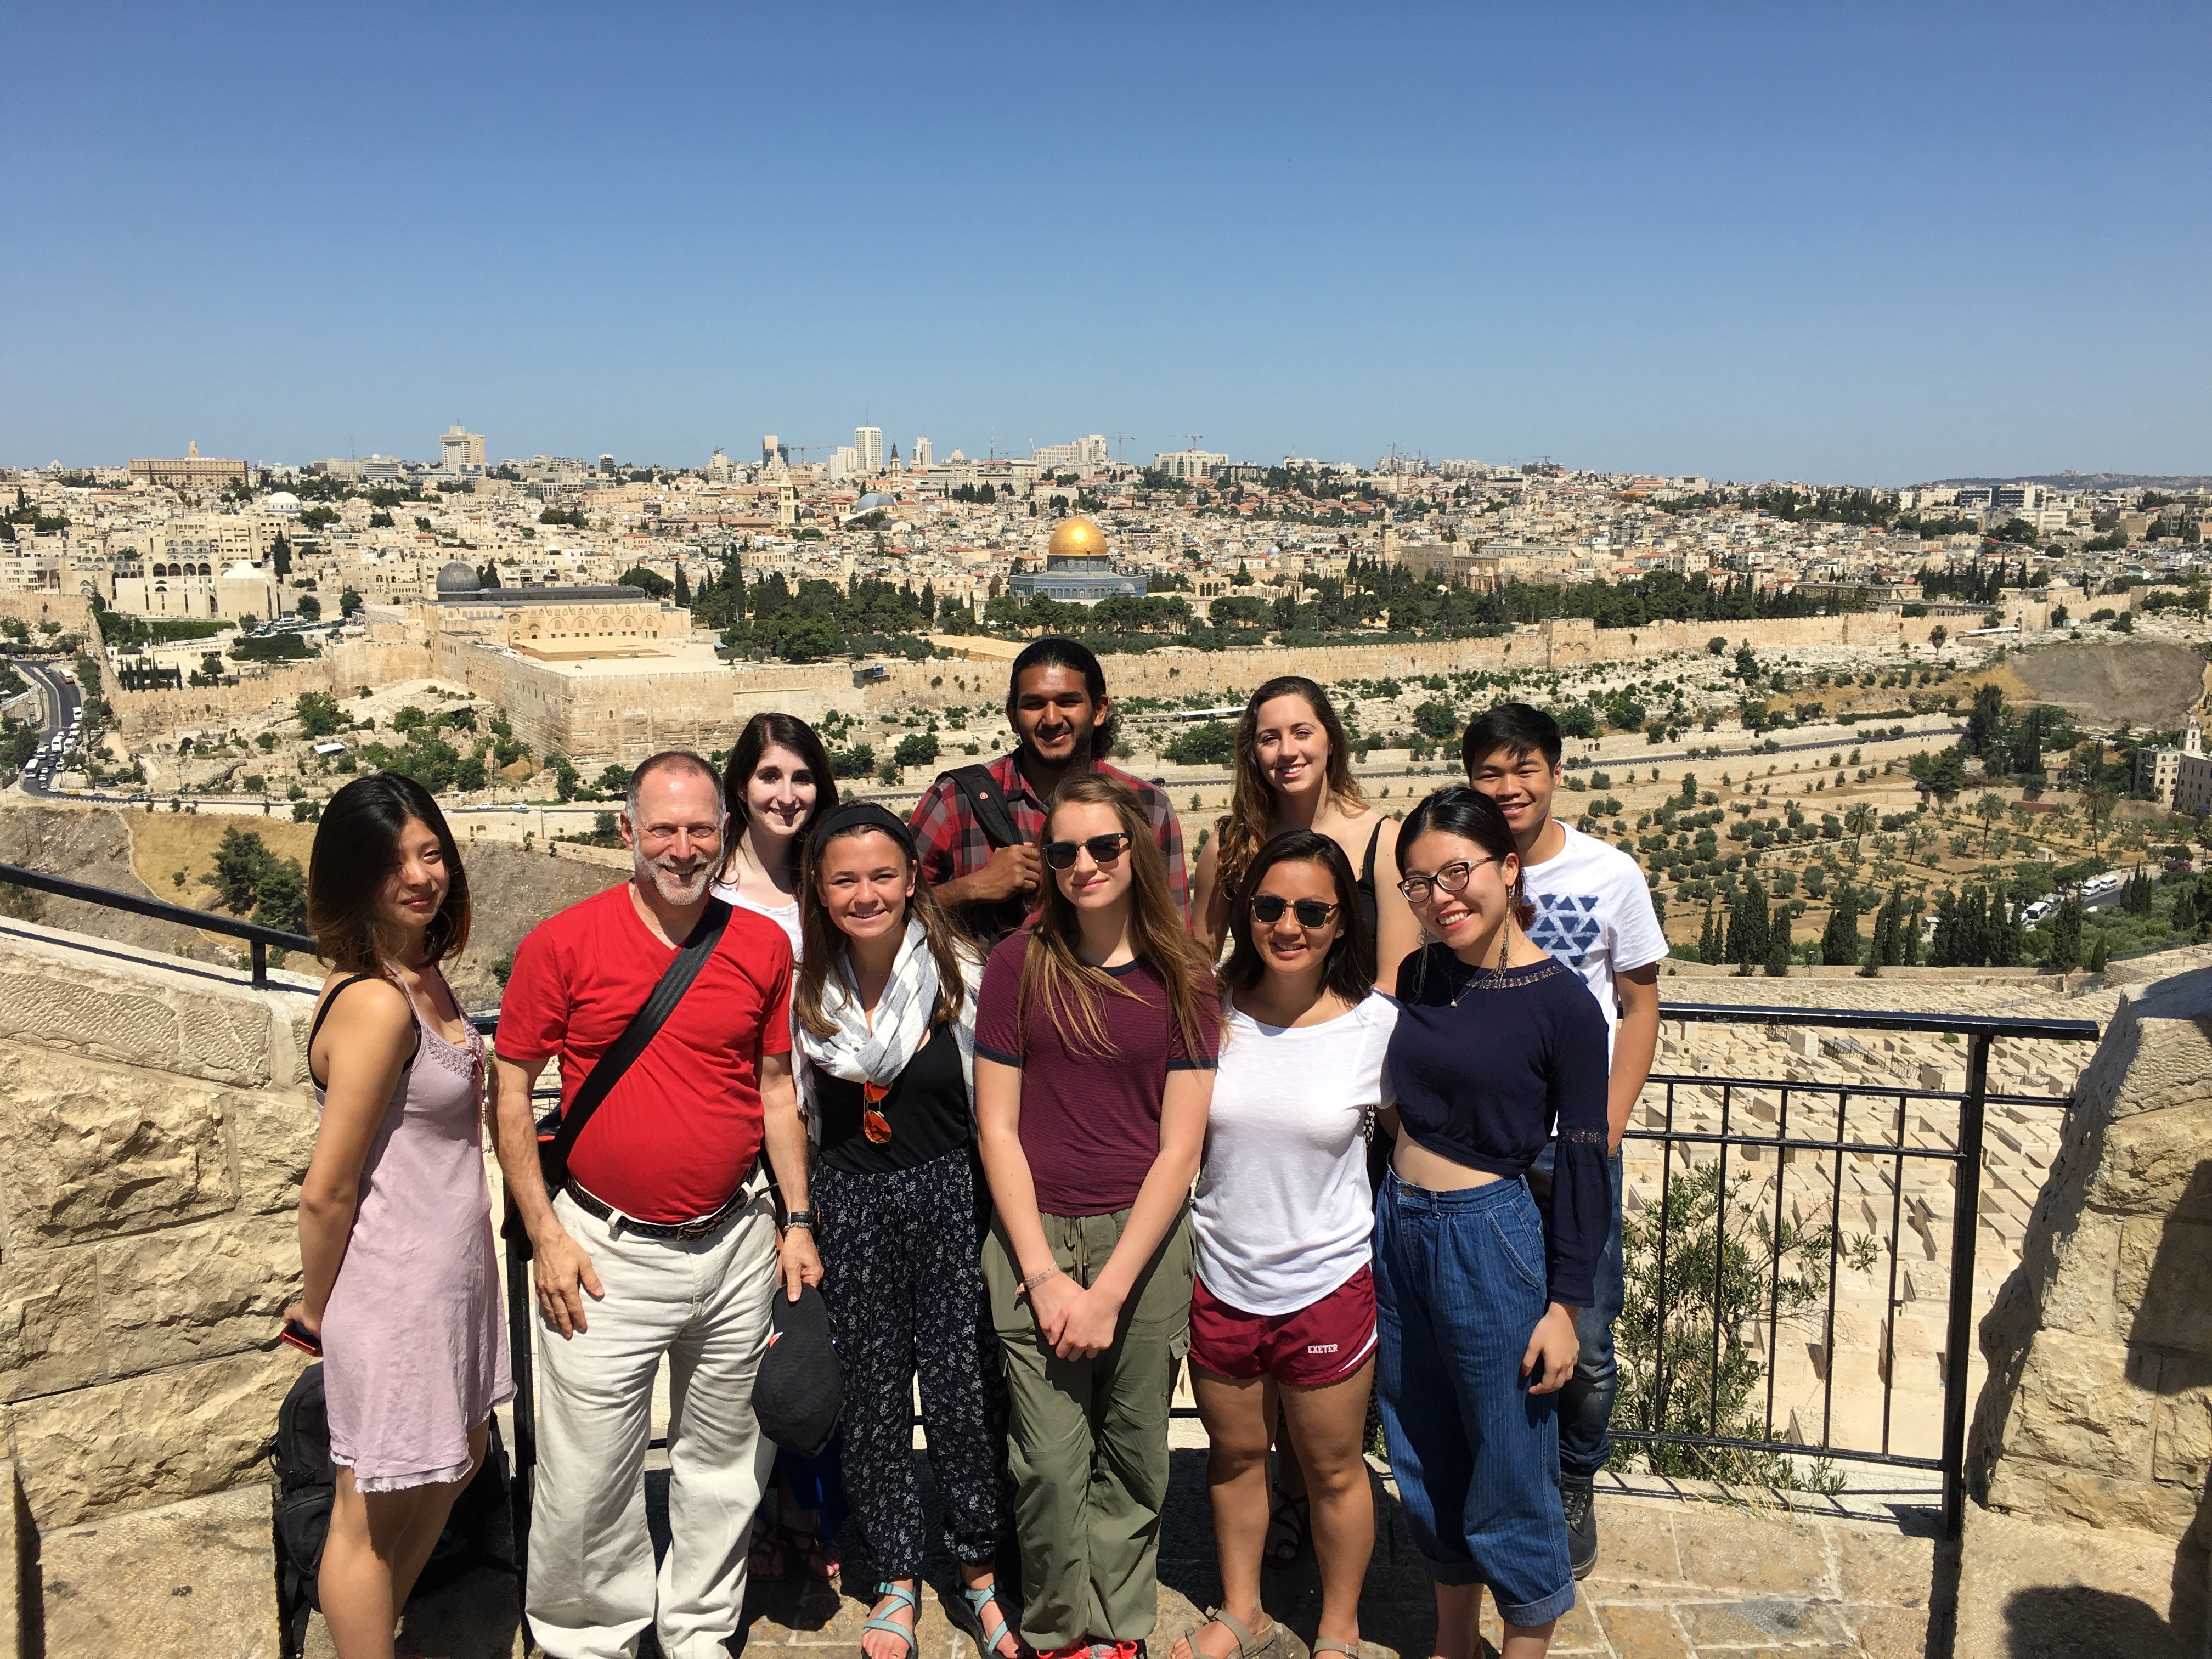 Students visit Jerusalem Temple Mount/Haram al-Sharif during a summer course examining the conflict between Israel and Palestine. Photo courtesy of Shalom Staub.